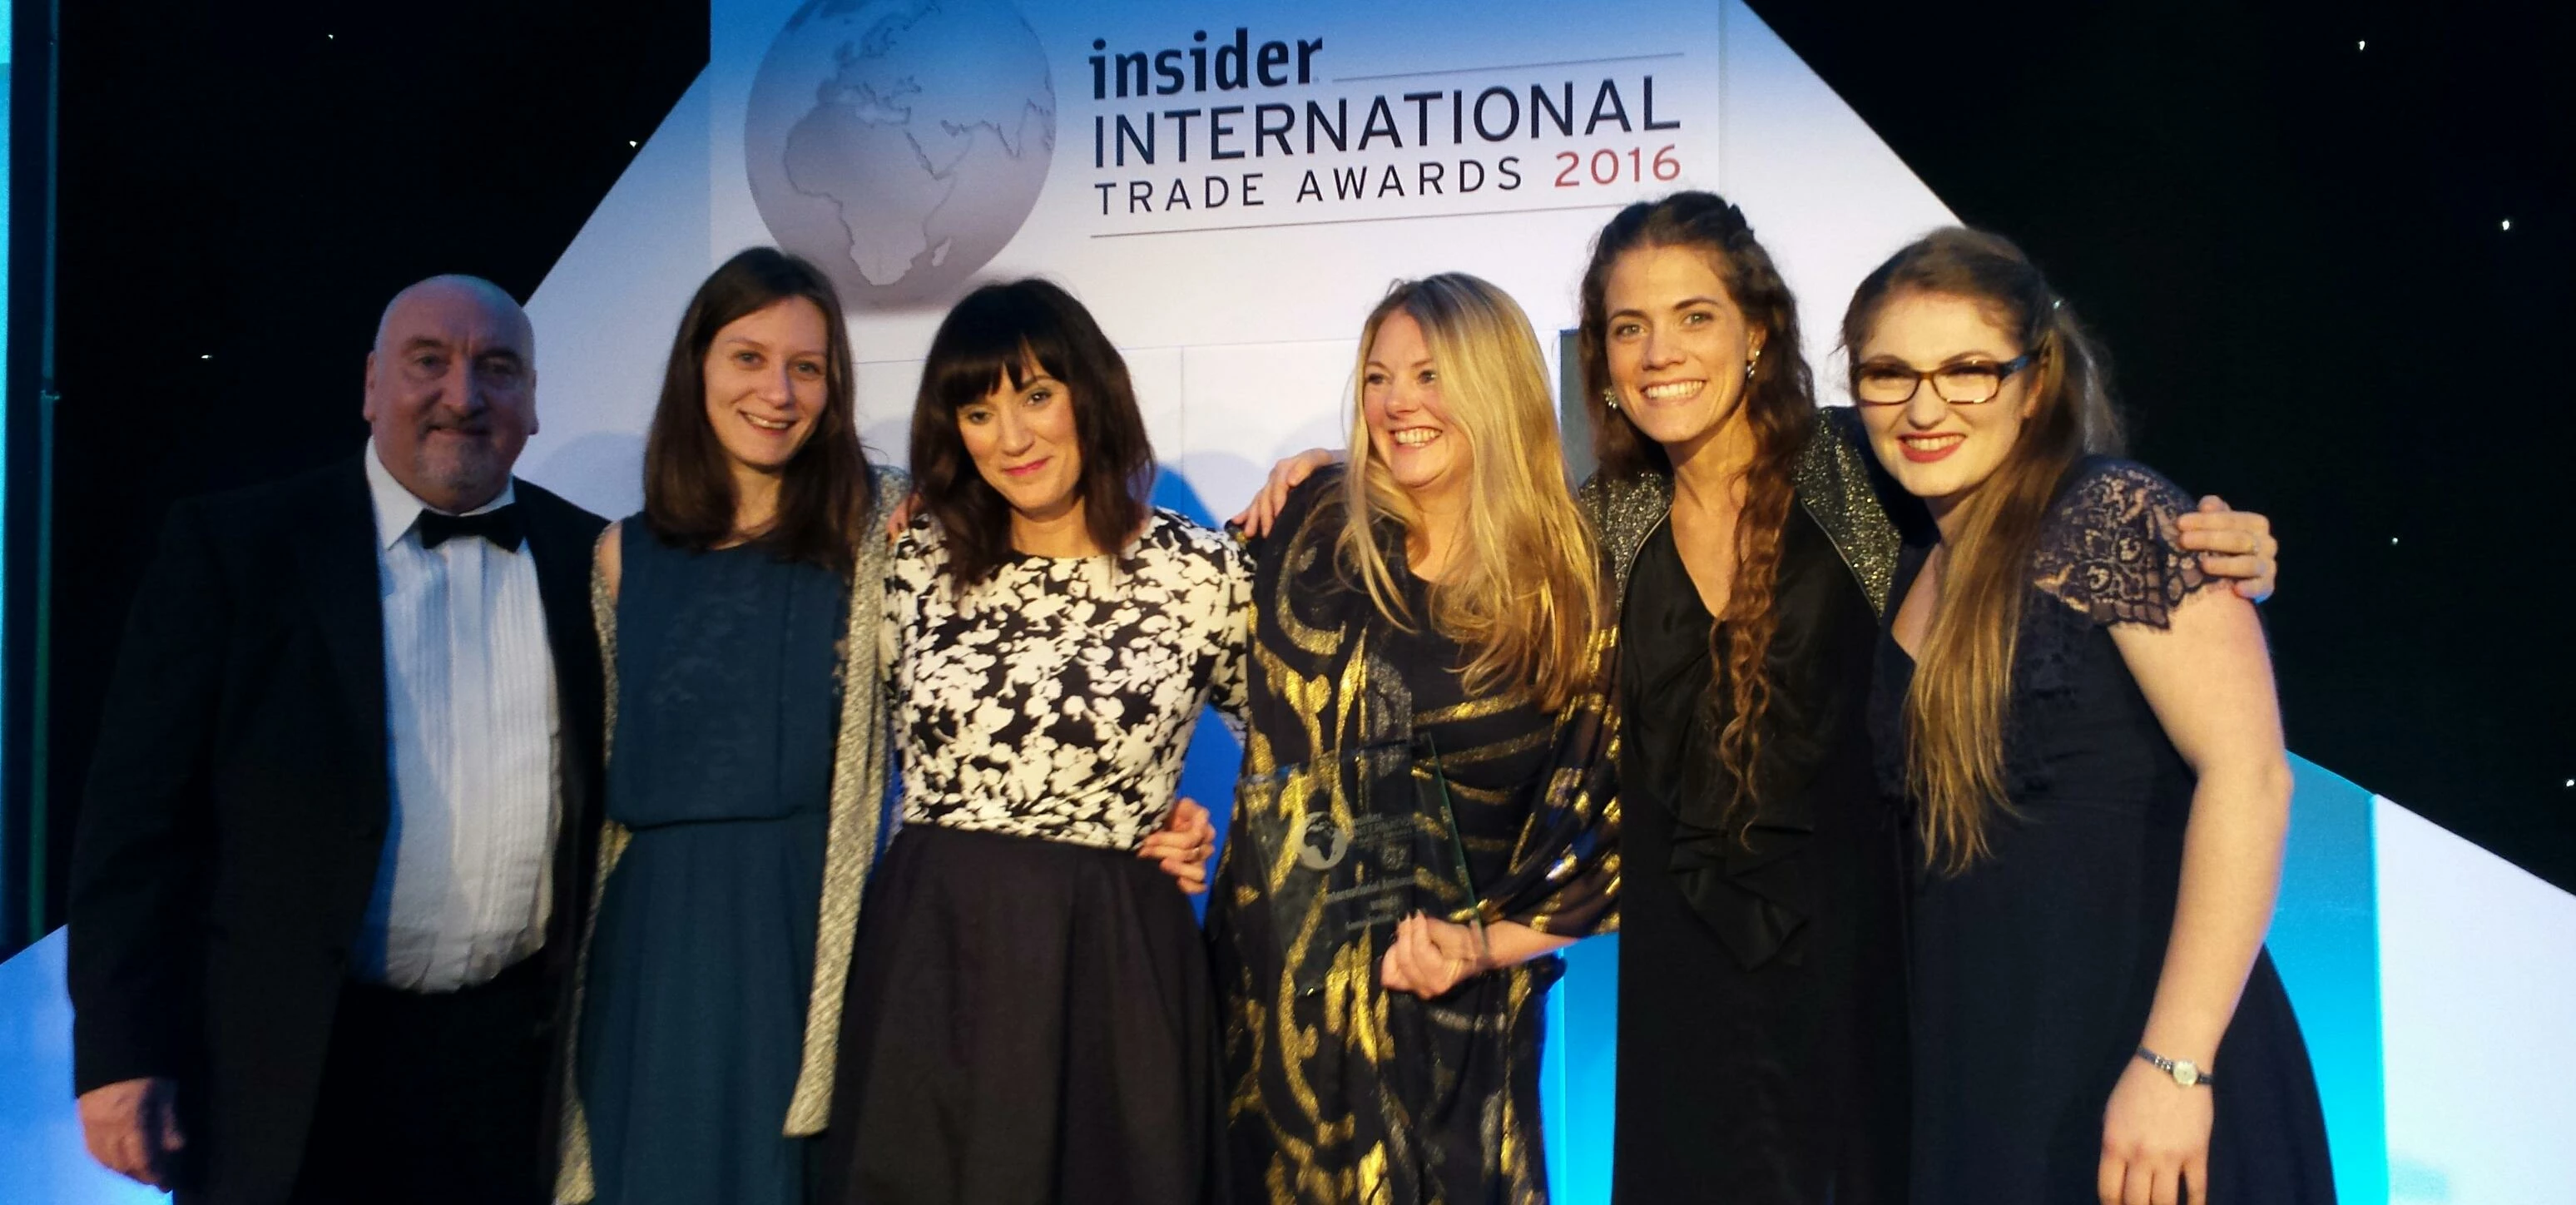 Emma is pictured centre (holding award) with members of the Vernacare marketing team